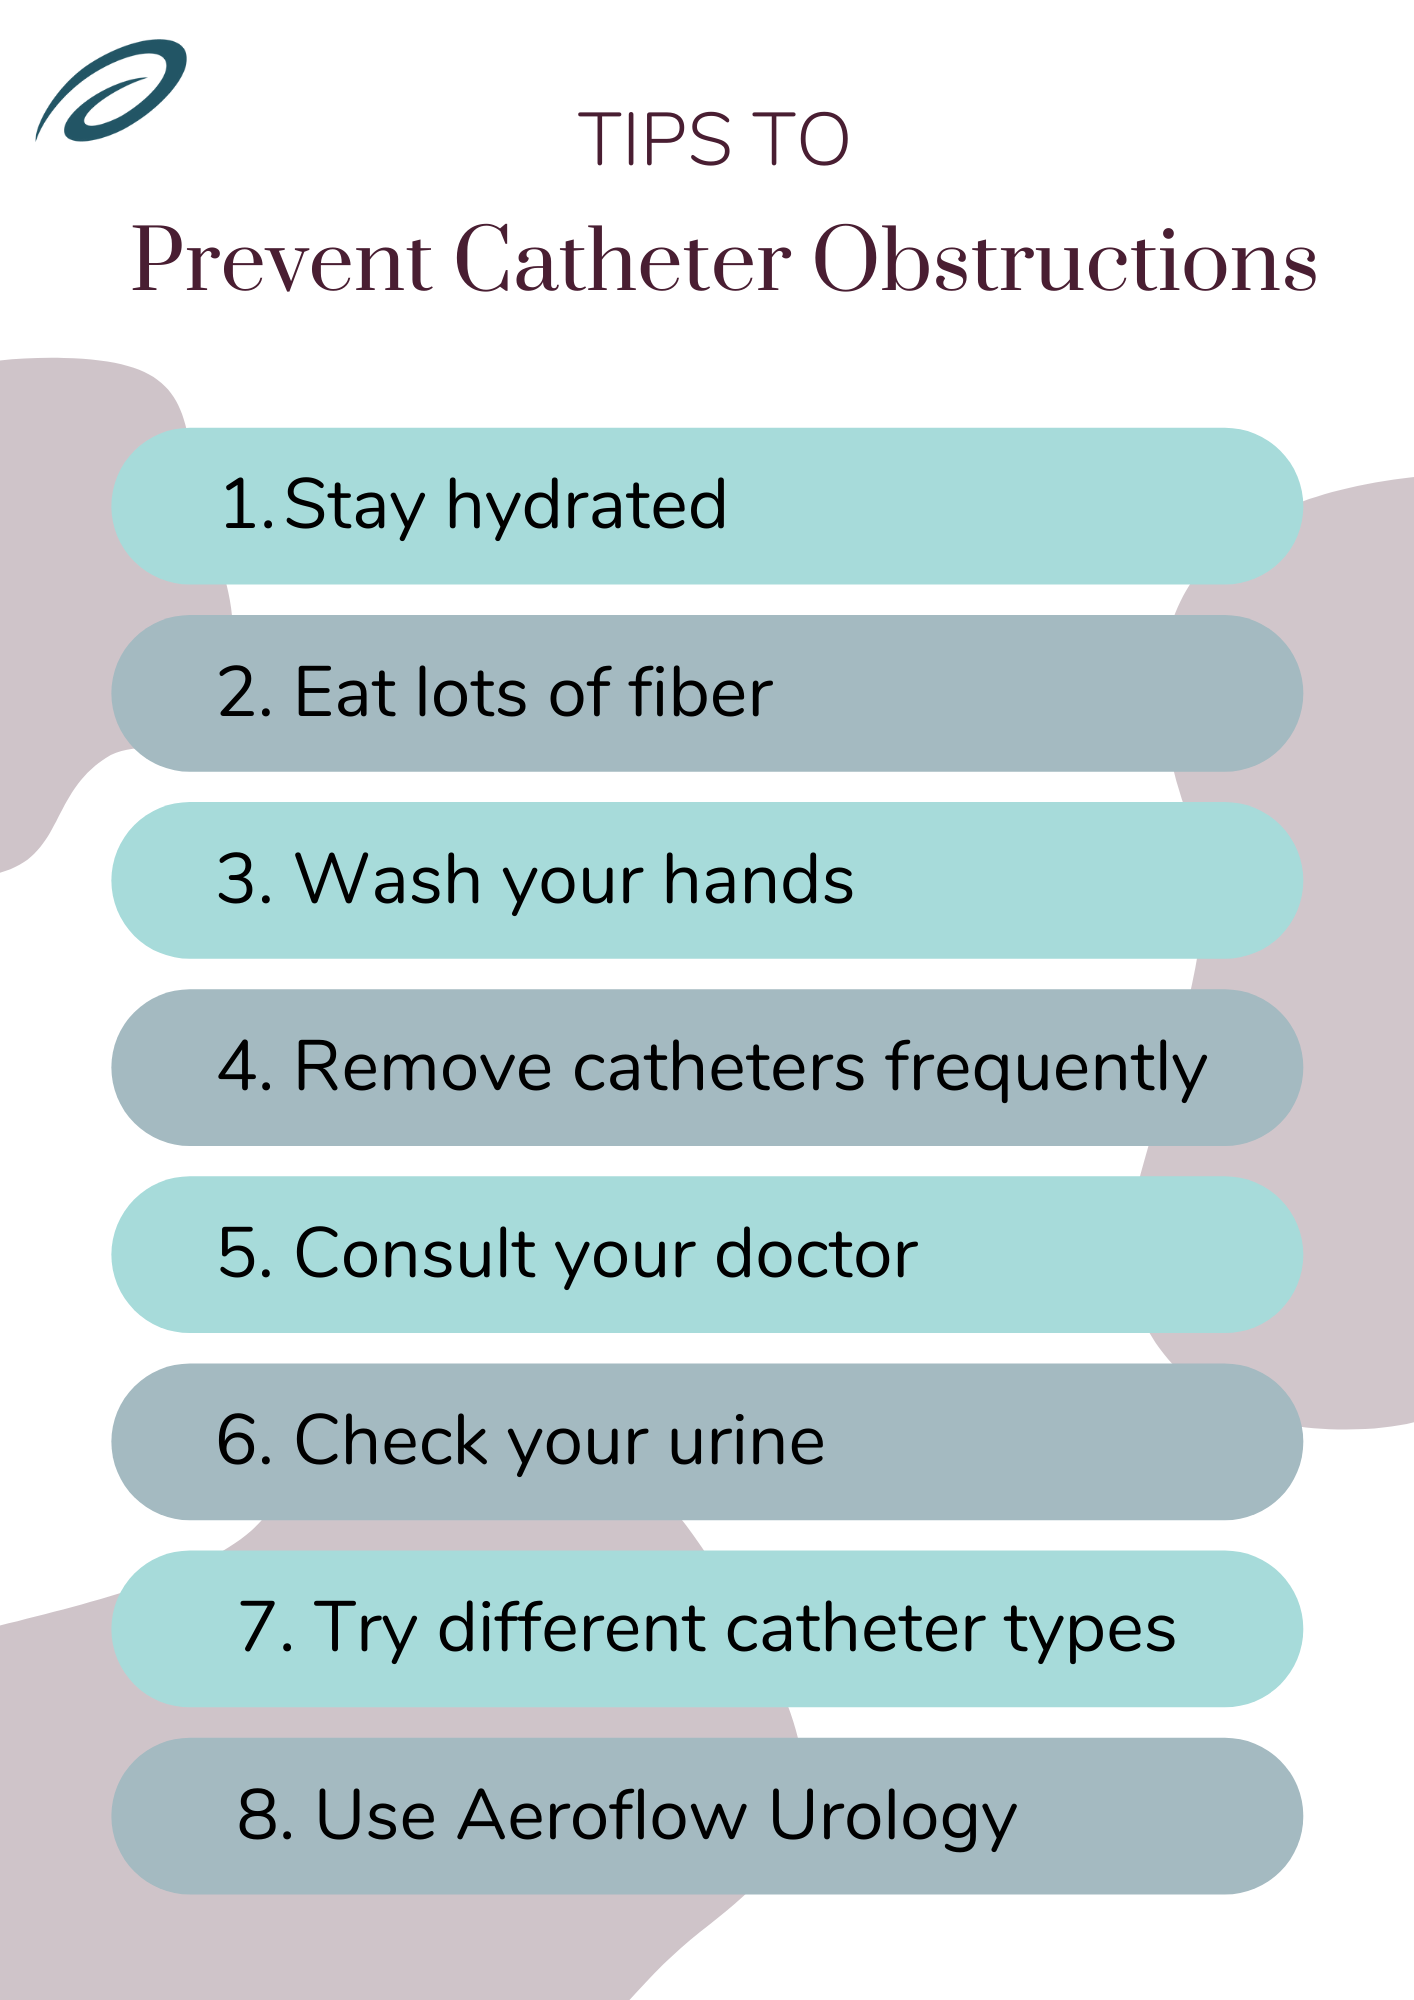 Tips for preventing obstructions in catheters